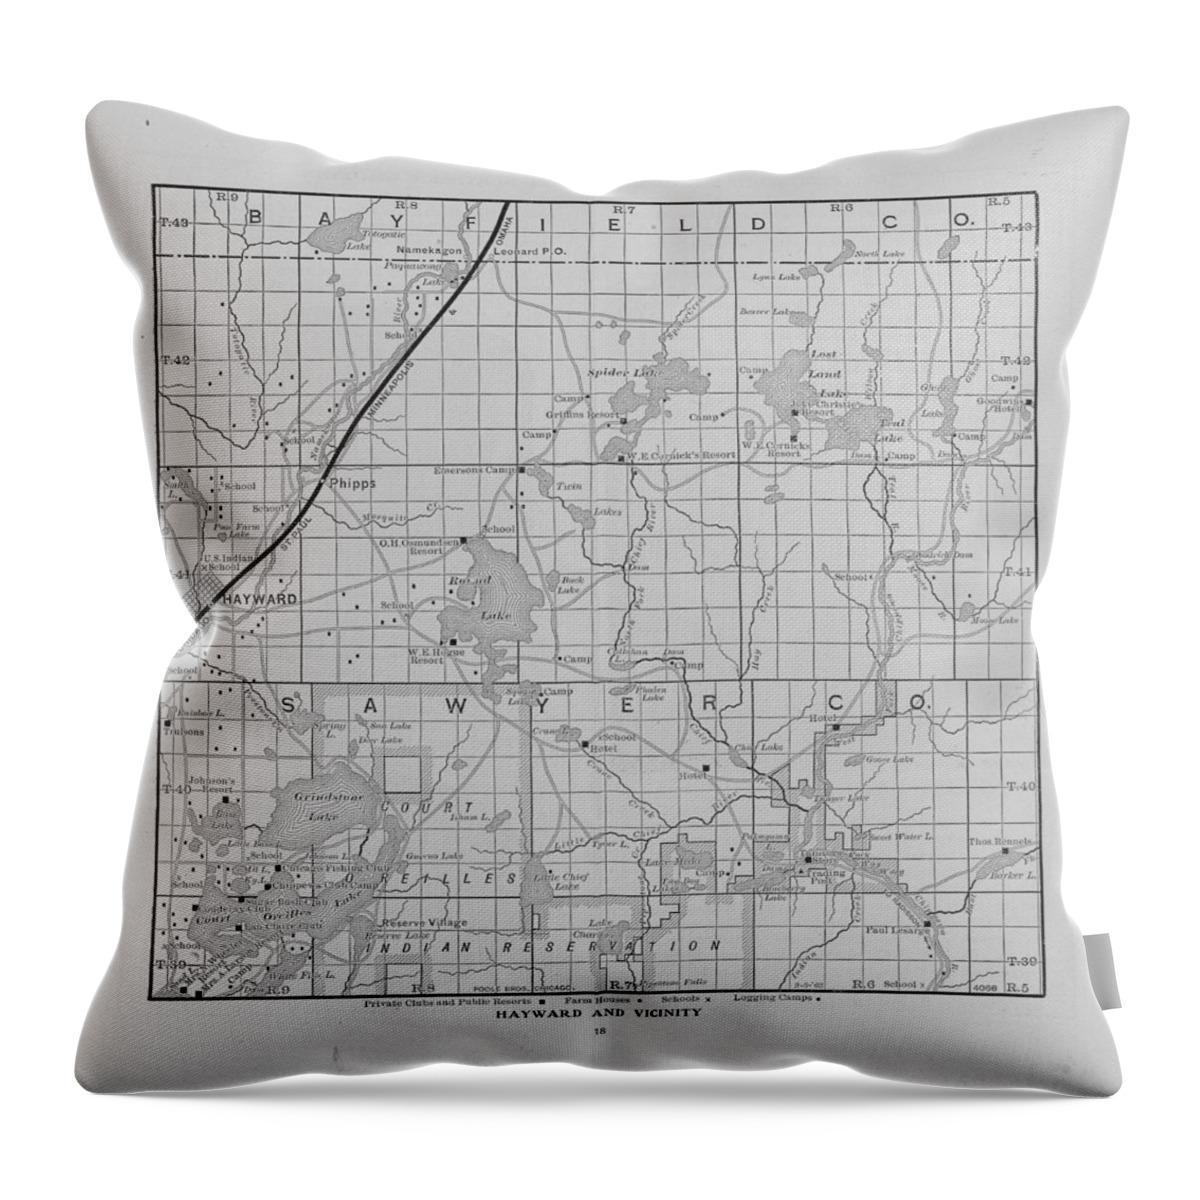 Publications Throw Pillow featuring the photograph Railway Map of Northern Wisconsin - Hayward and Vicinity by Chicago and North Western Historical Society